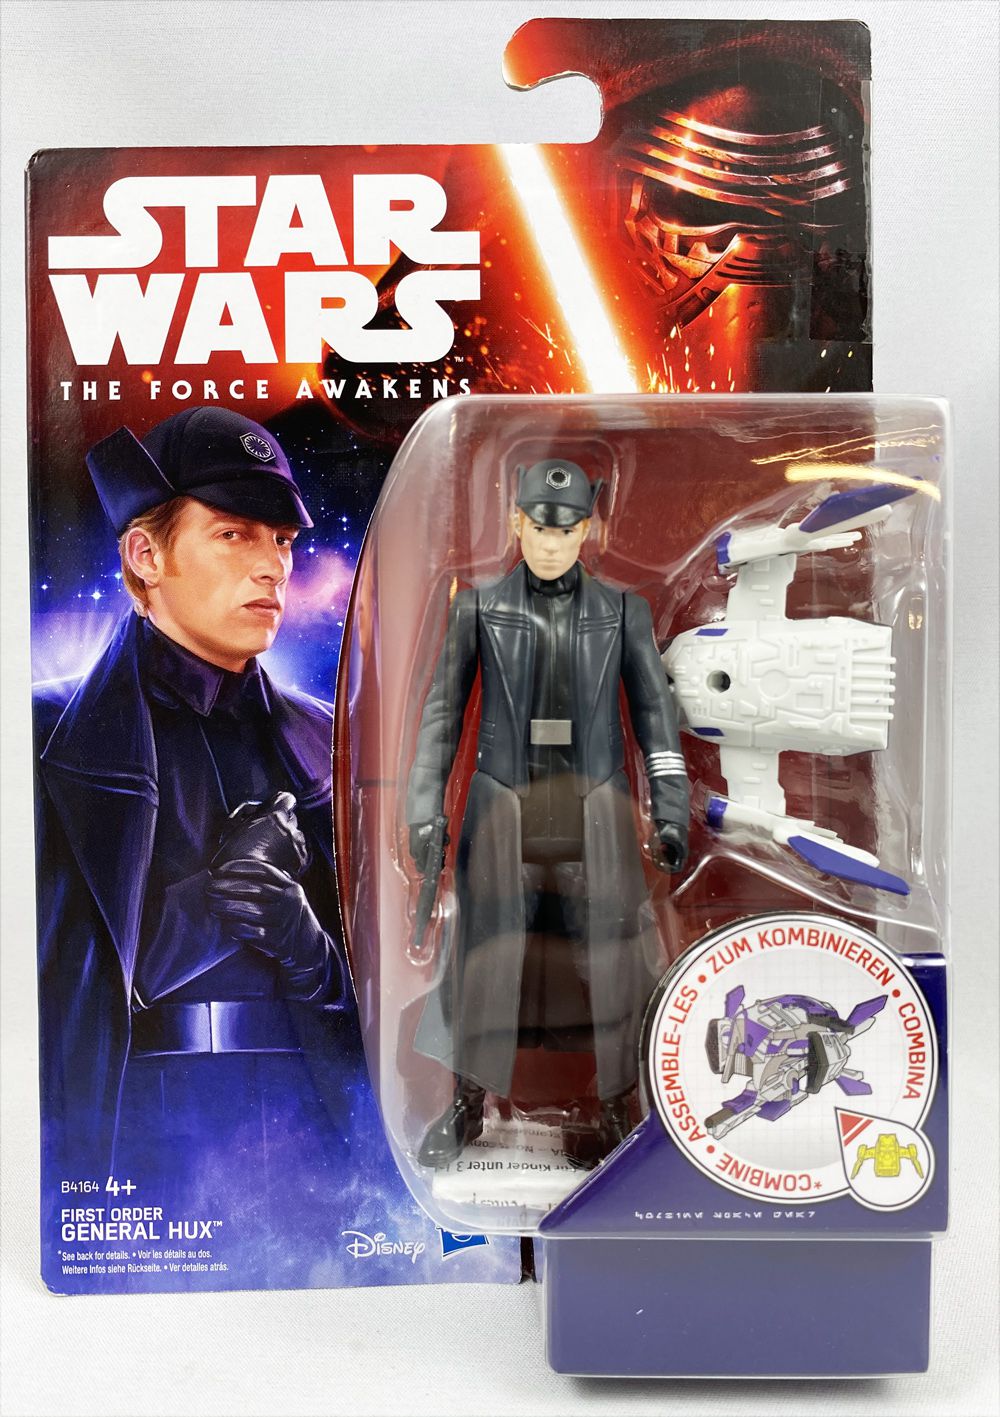 Star Wars The Force Awakens Figure Space Mission First Order General Hux 